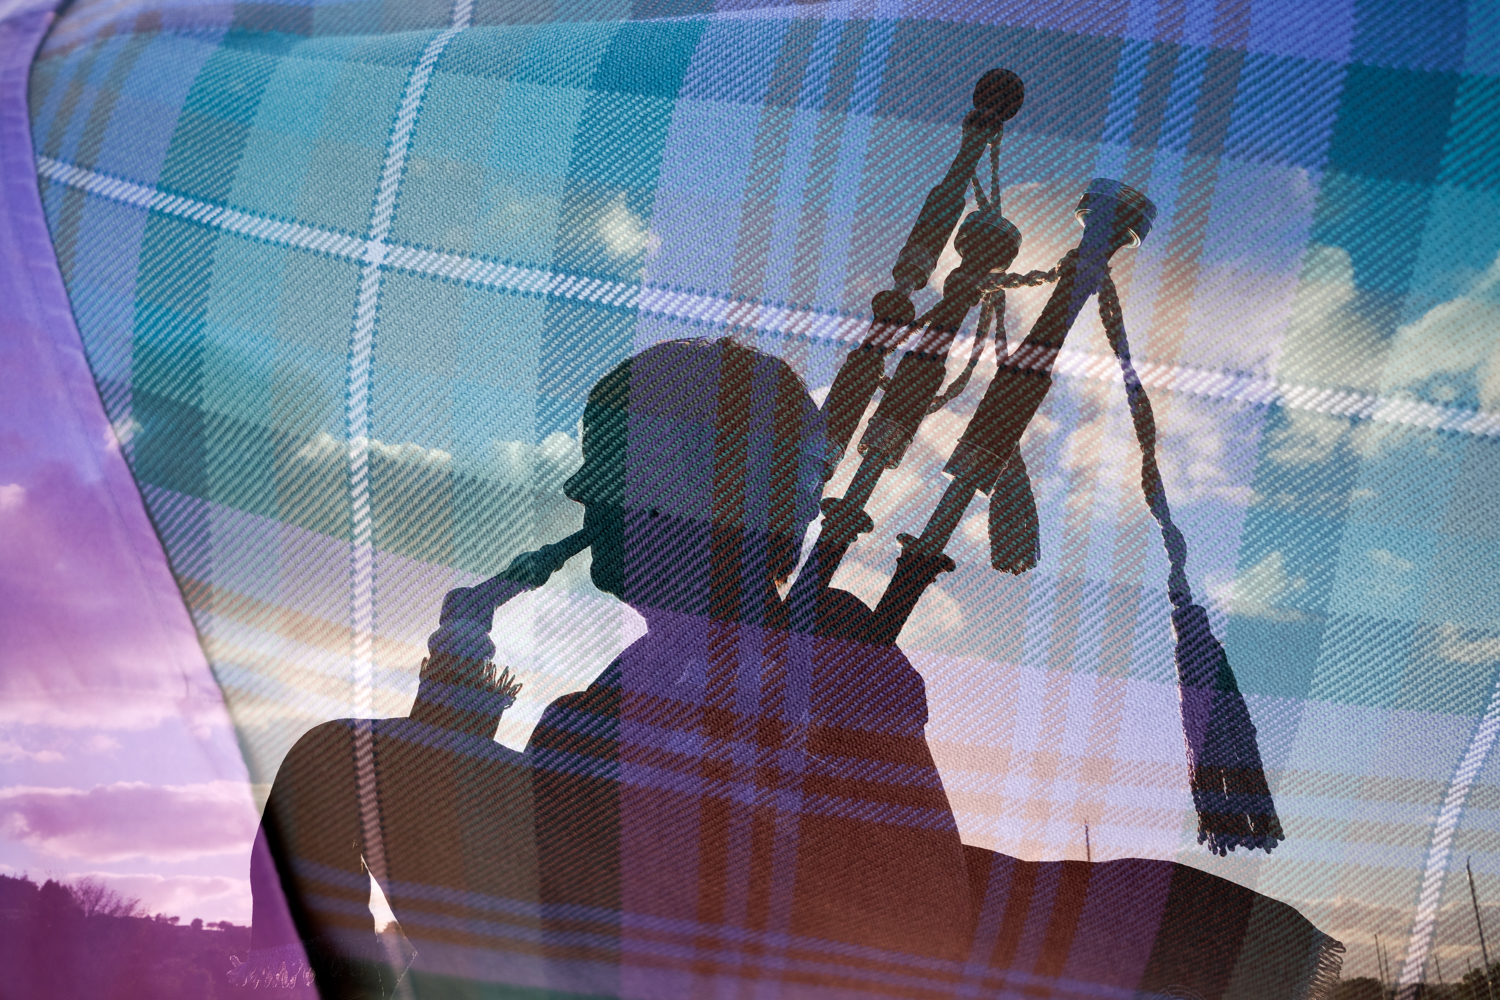  On our first day aboard Lord of the Glens, a bagpiper greeted us with amazing song. Here is a double exposure image of the bagpiper and her traditional tartan. 